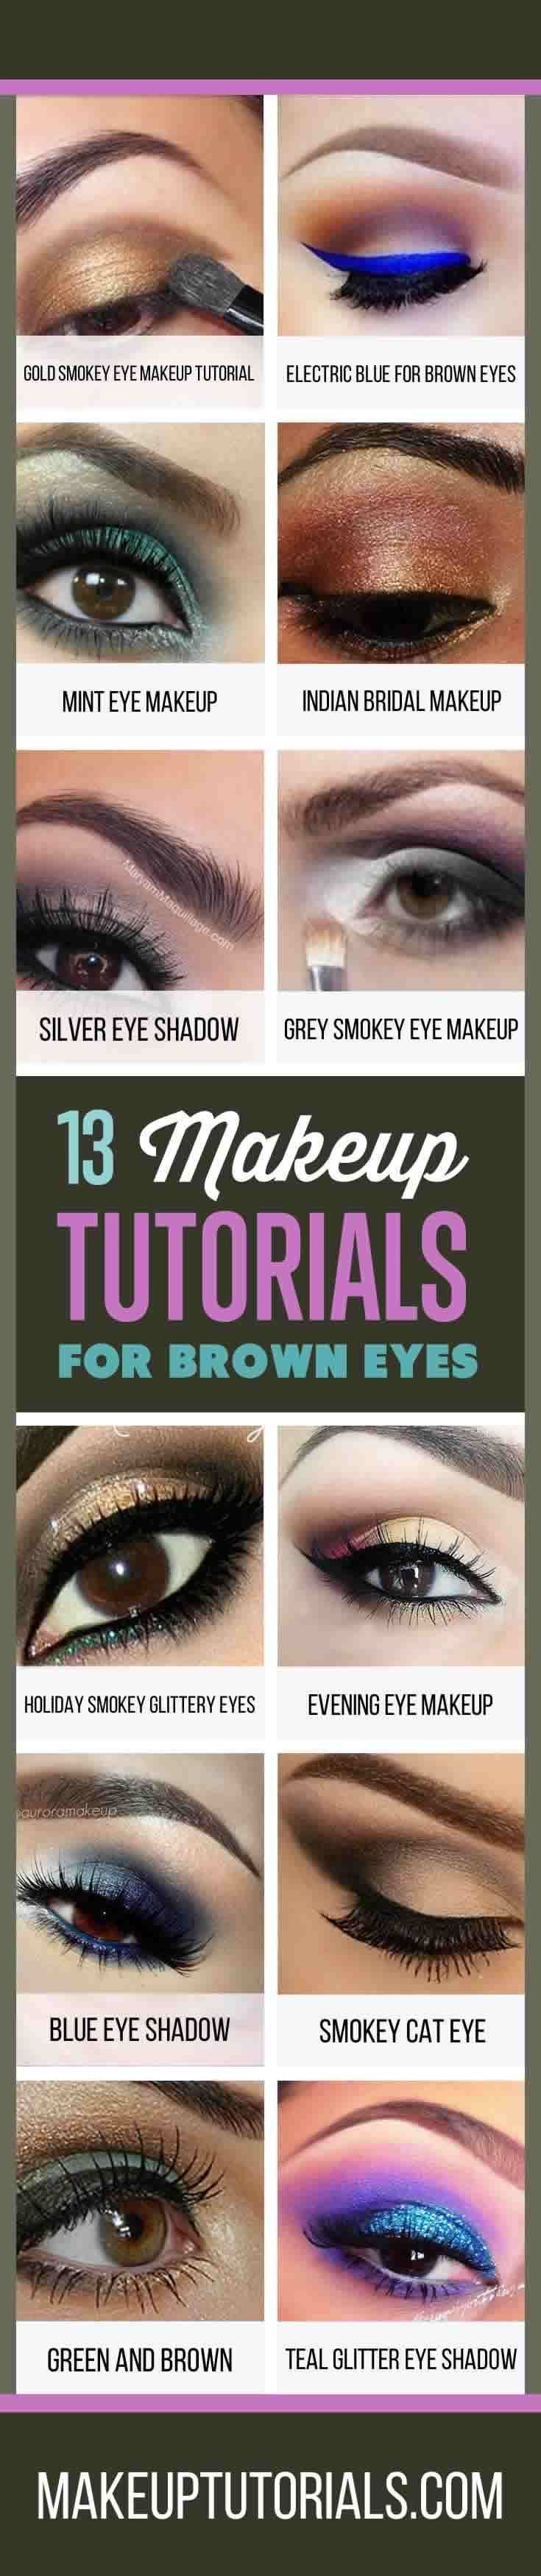 How To Do Awesome Makeup Tutorials For Brown Eyes | Cool Makeup Ideas and Easy D...